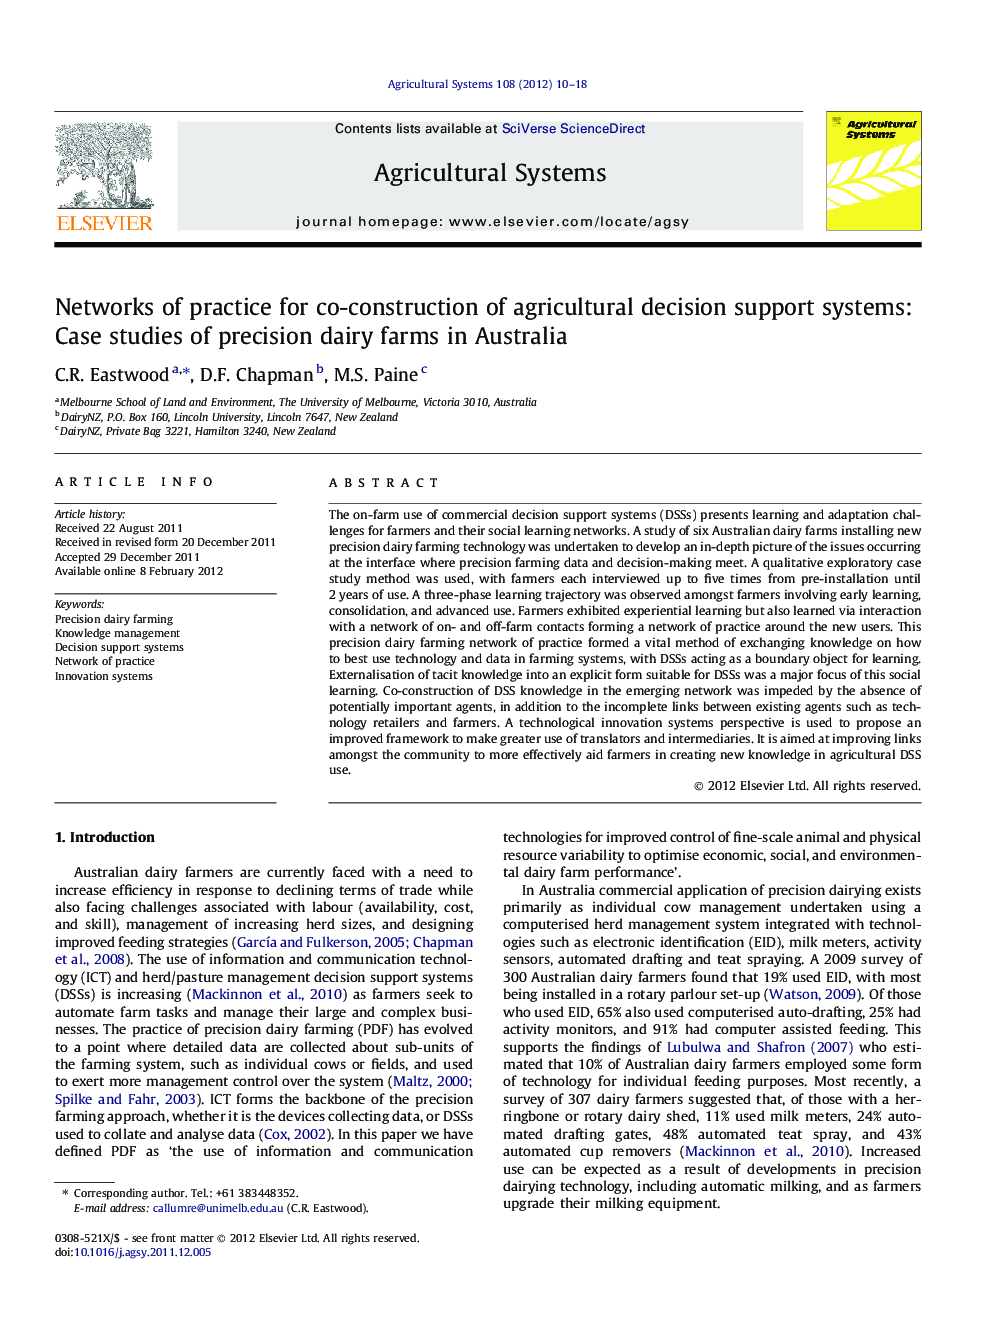 Networks of practice for co-construction of agricultural decision support systems: Case studies of precision dairy farms in Australia